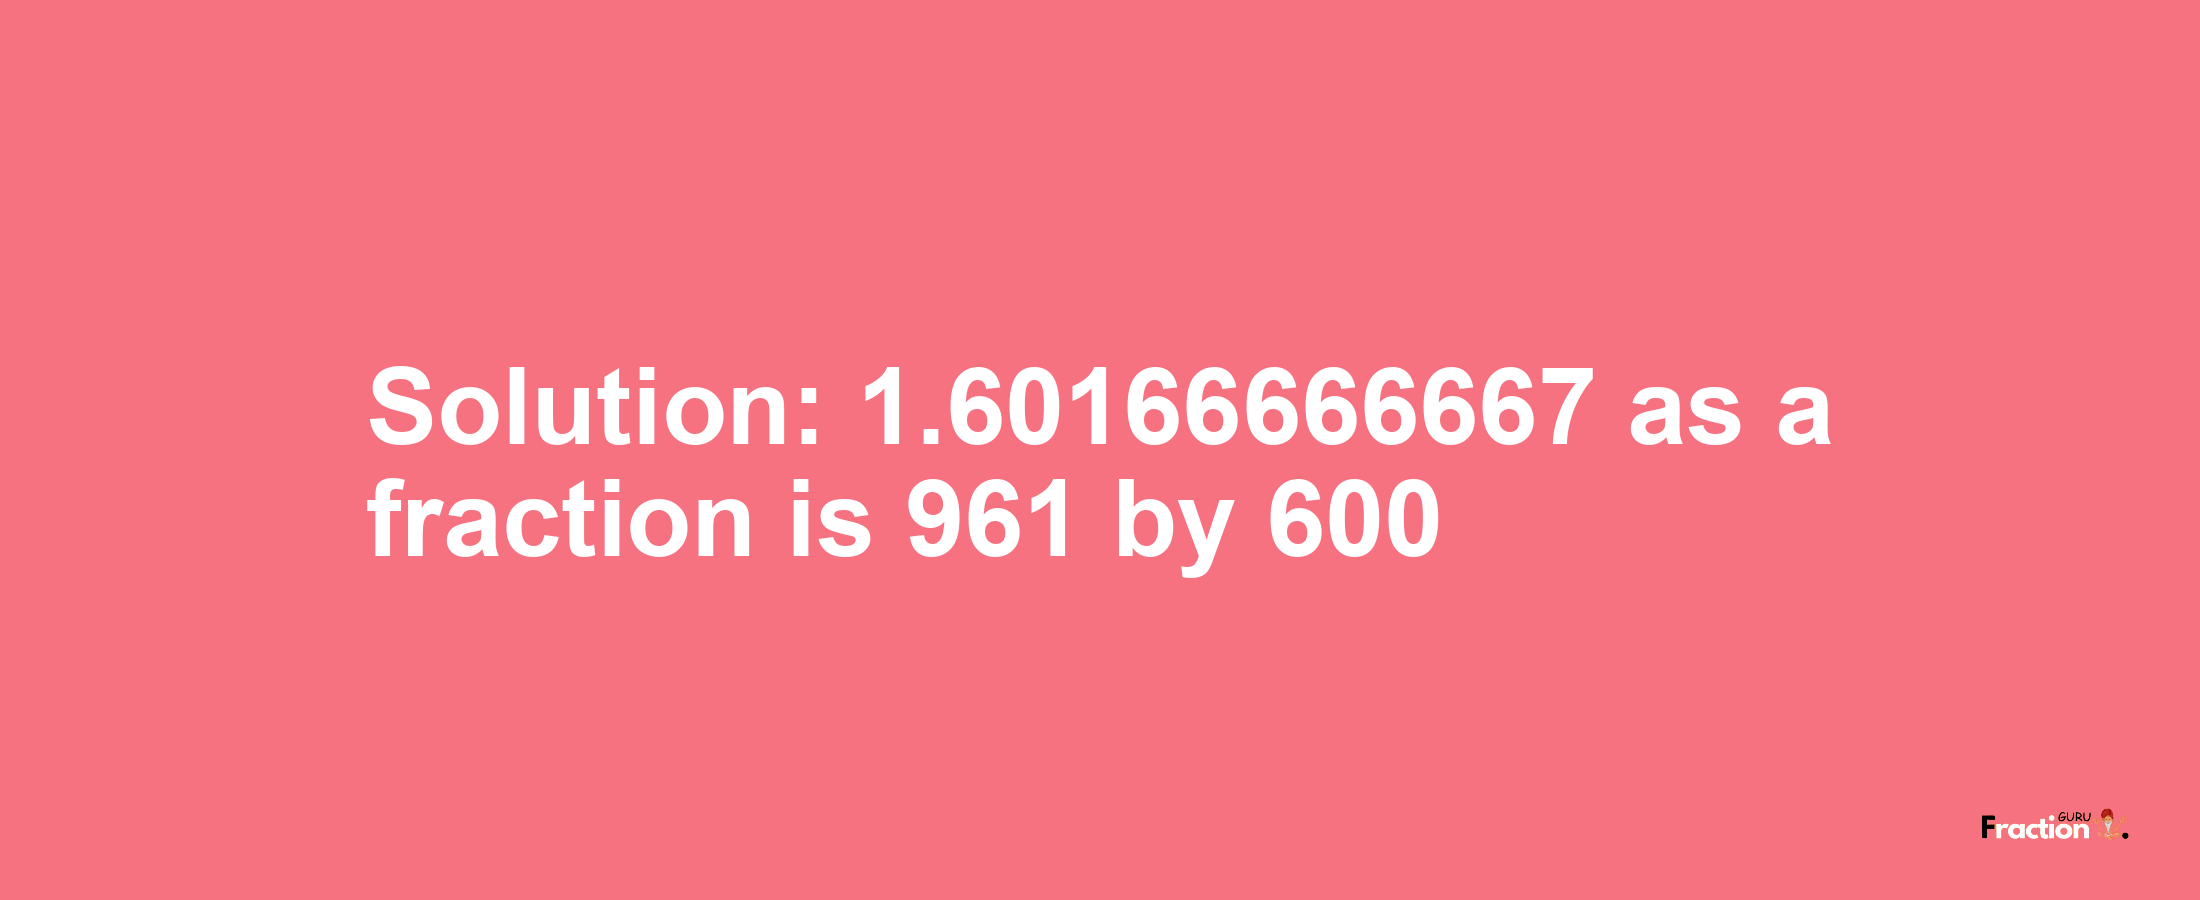 Solution:1.60166666667 as a fraction is 961/600